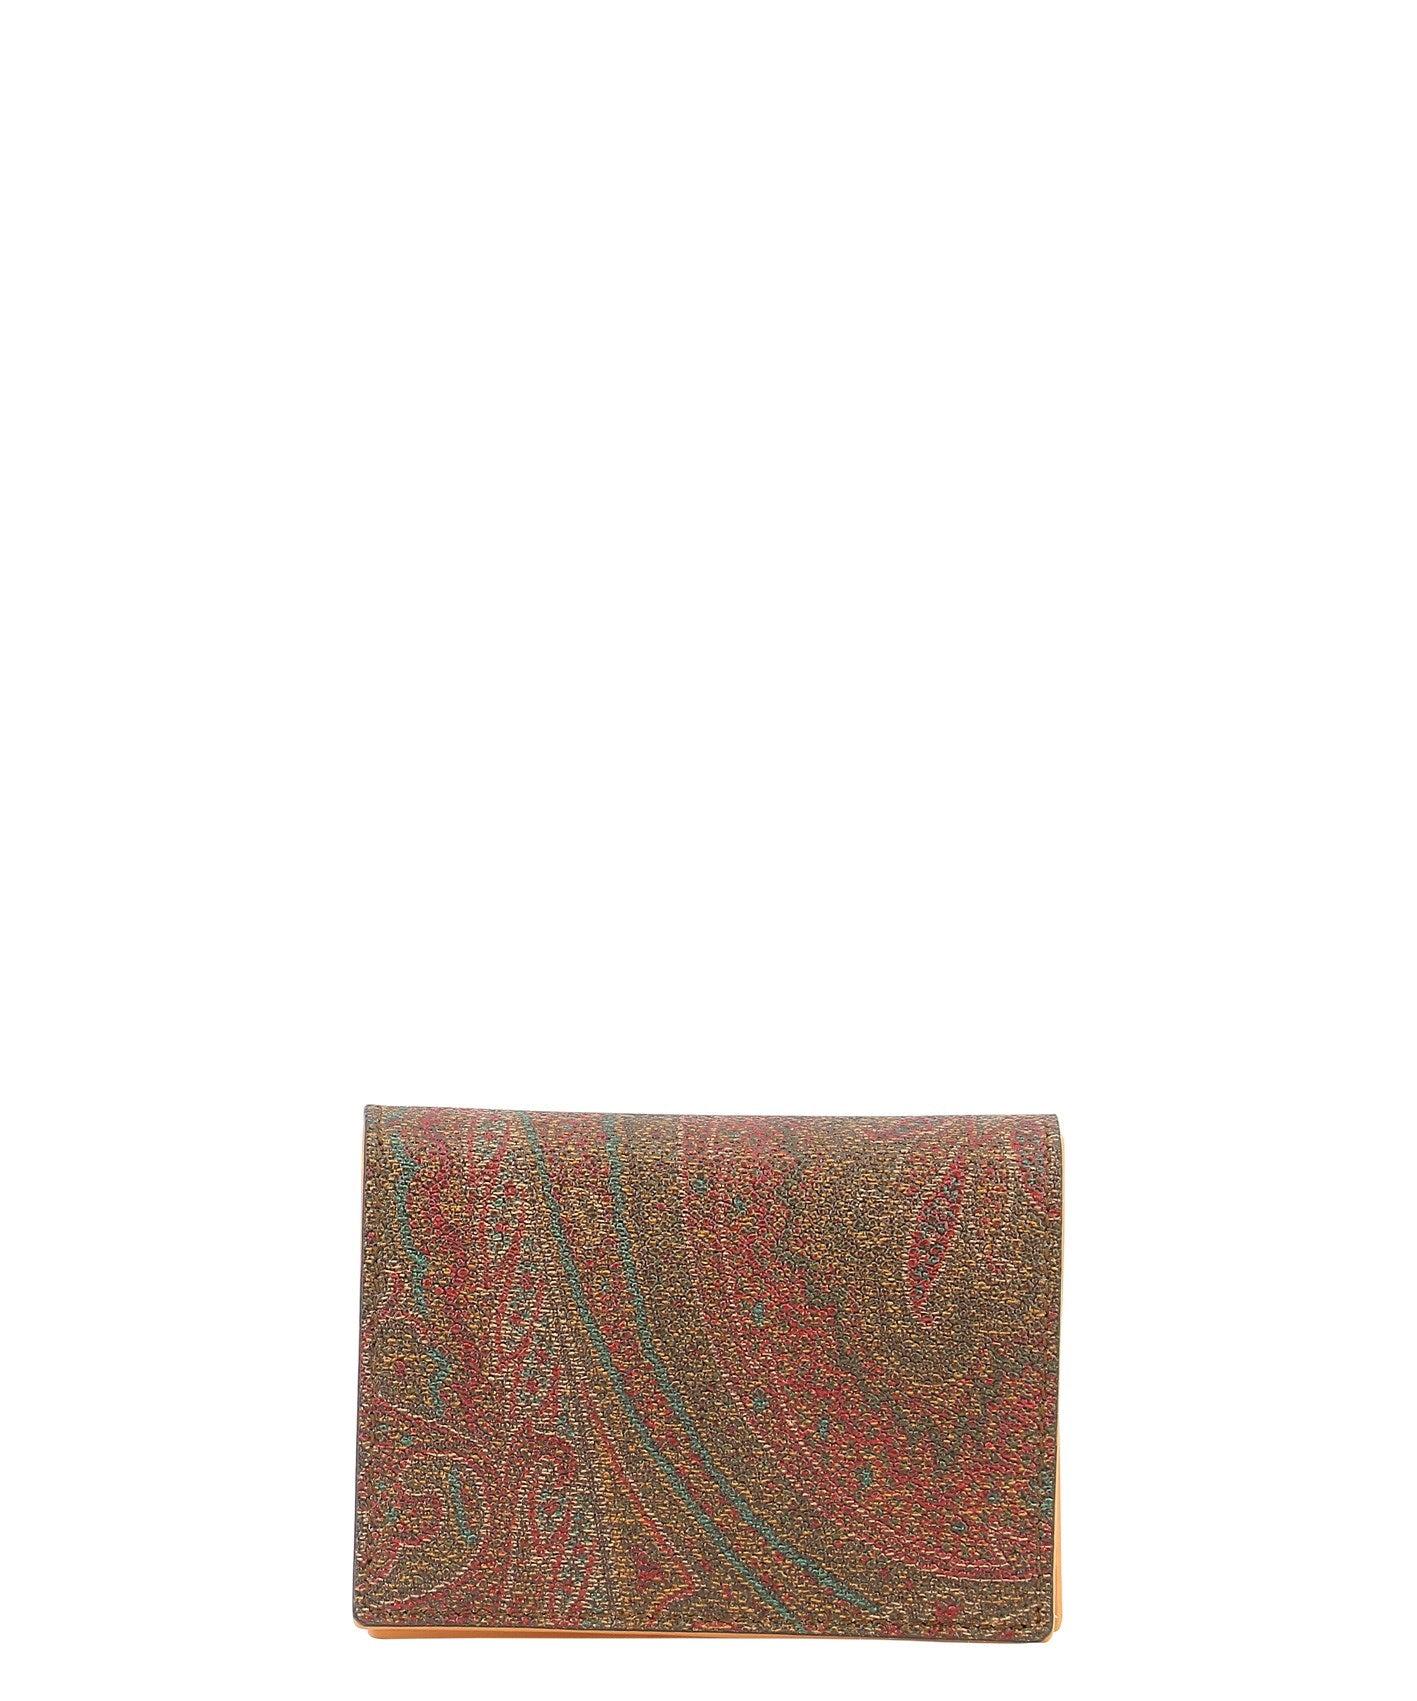 Etro Paisley Printed Compact Wallet